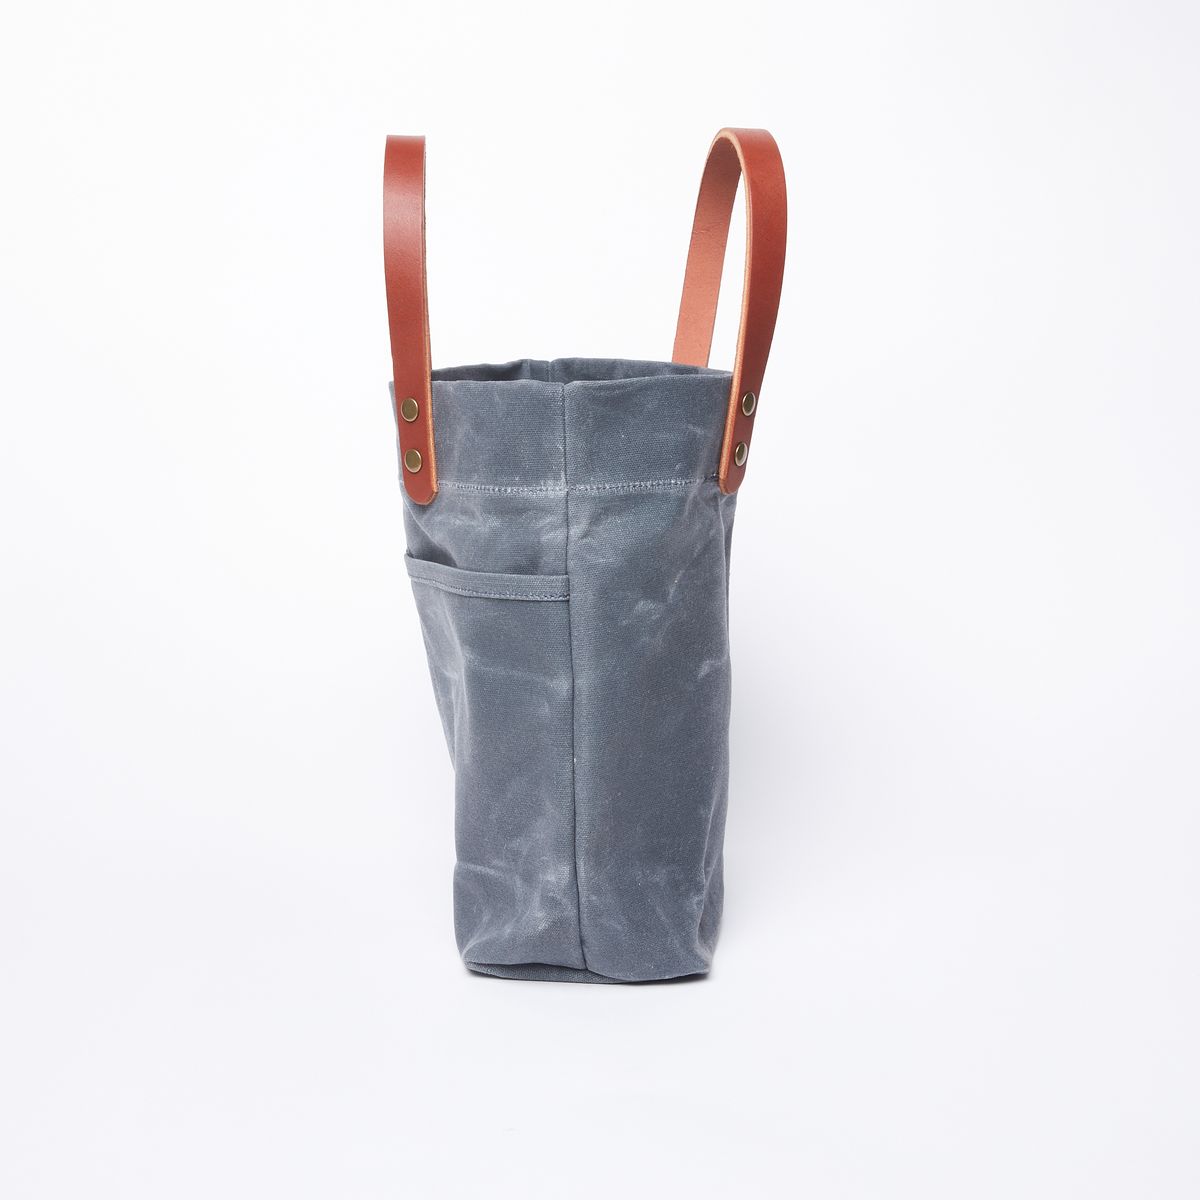 Side view of a blue grey waxed canvas bag with two external pockets on one side and a set of leather handles